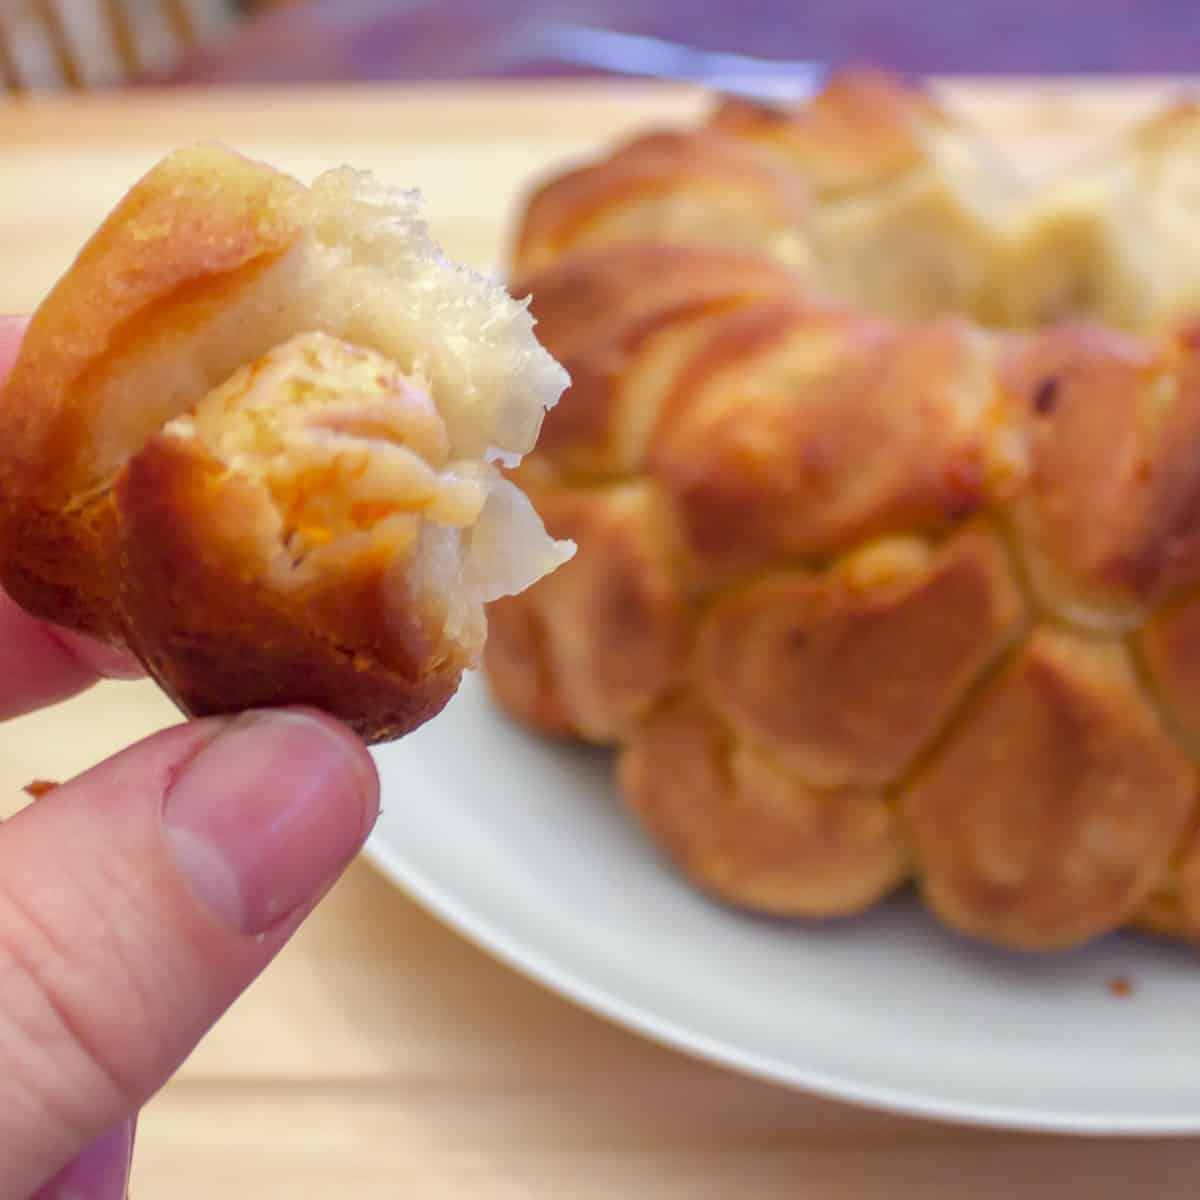 A bite sized biscuit stuffed with seafood and cheese.